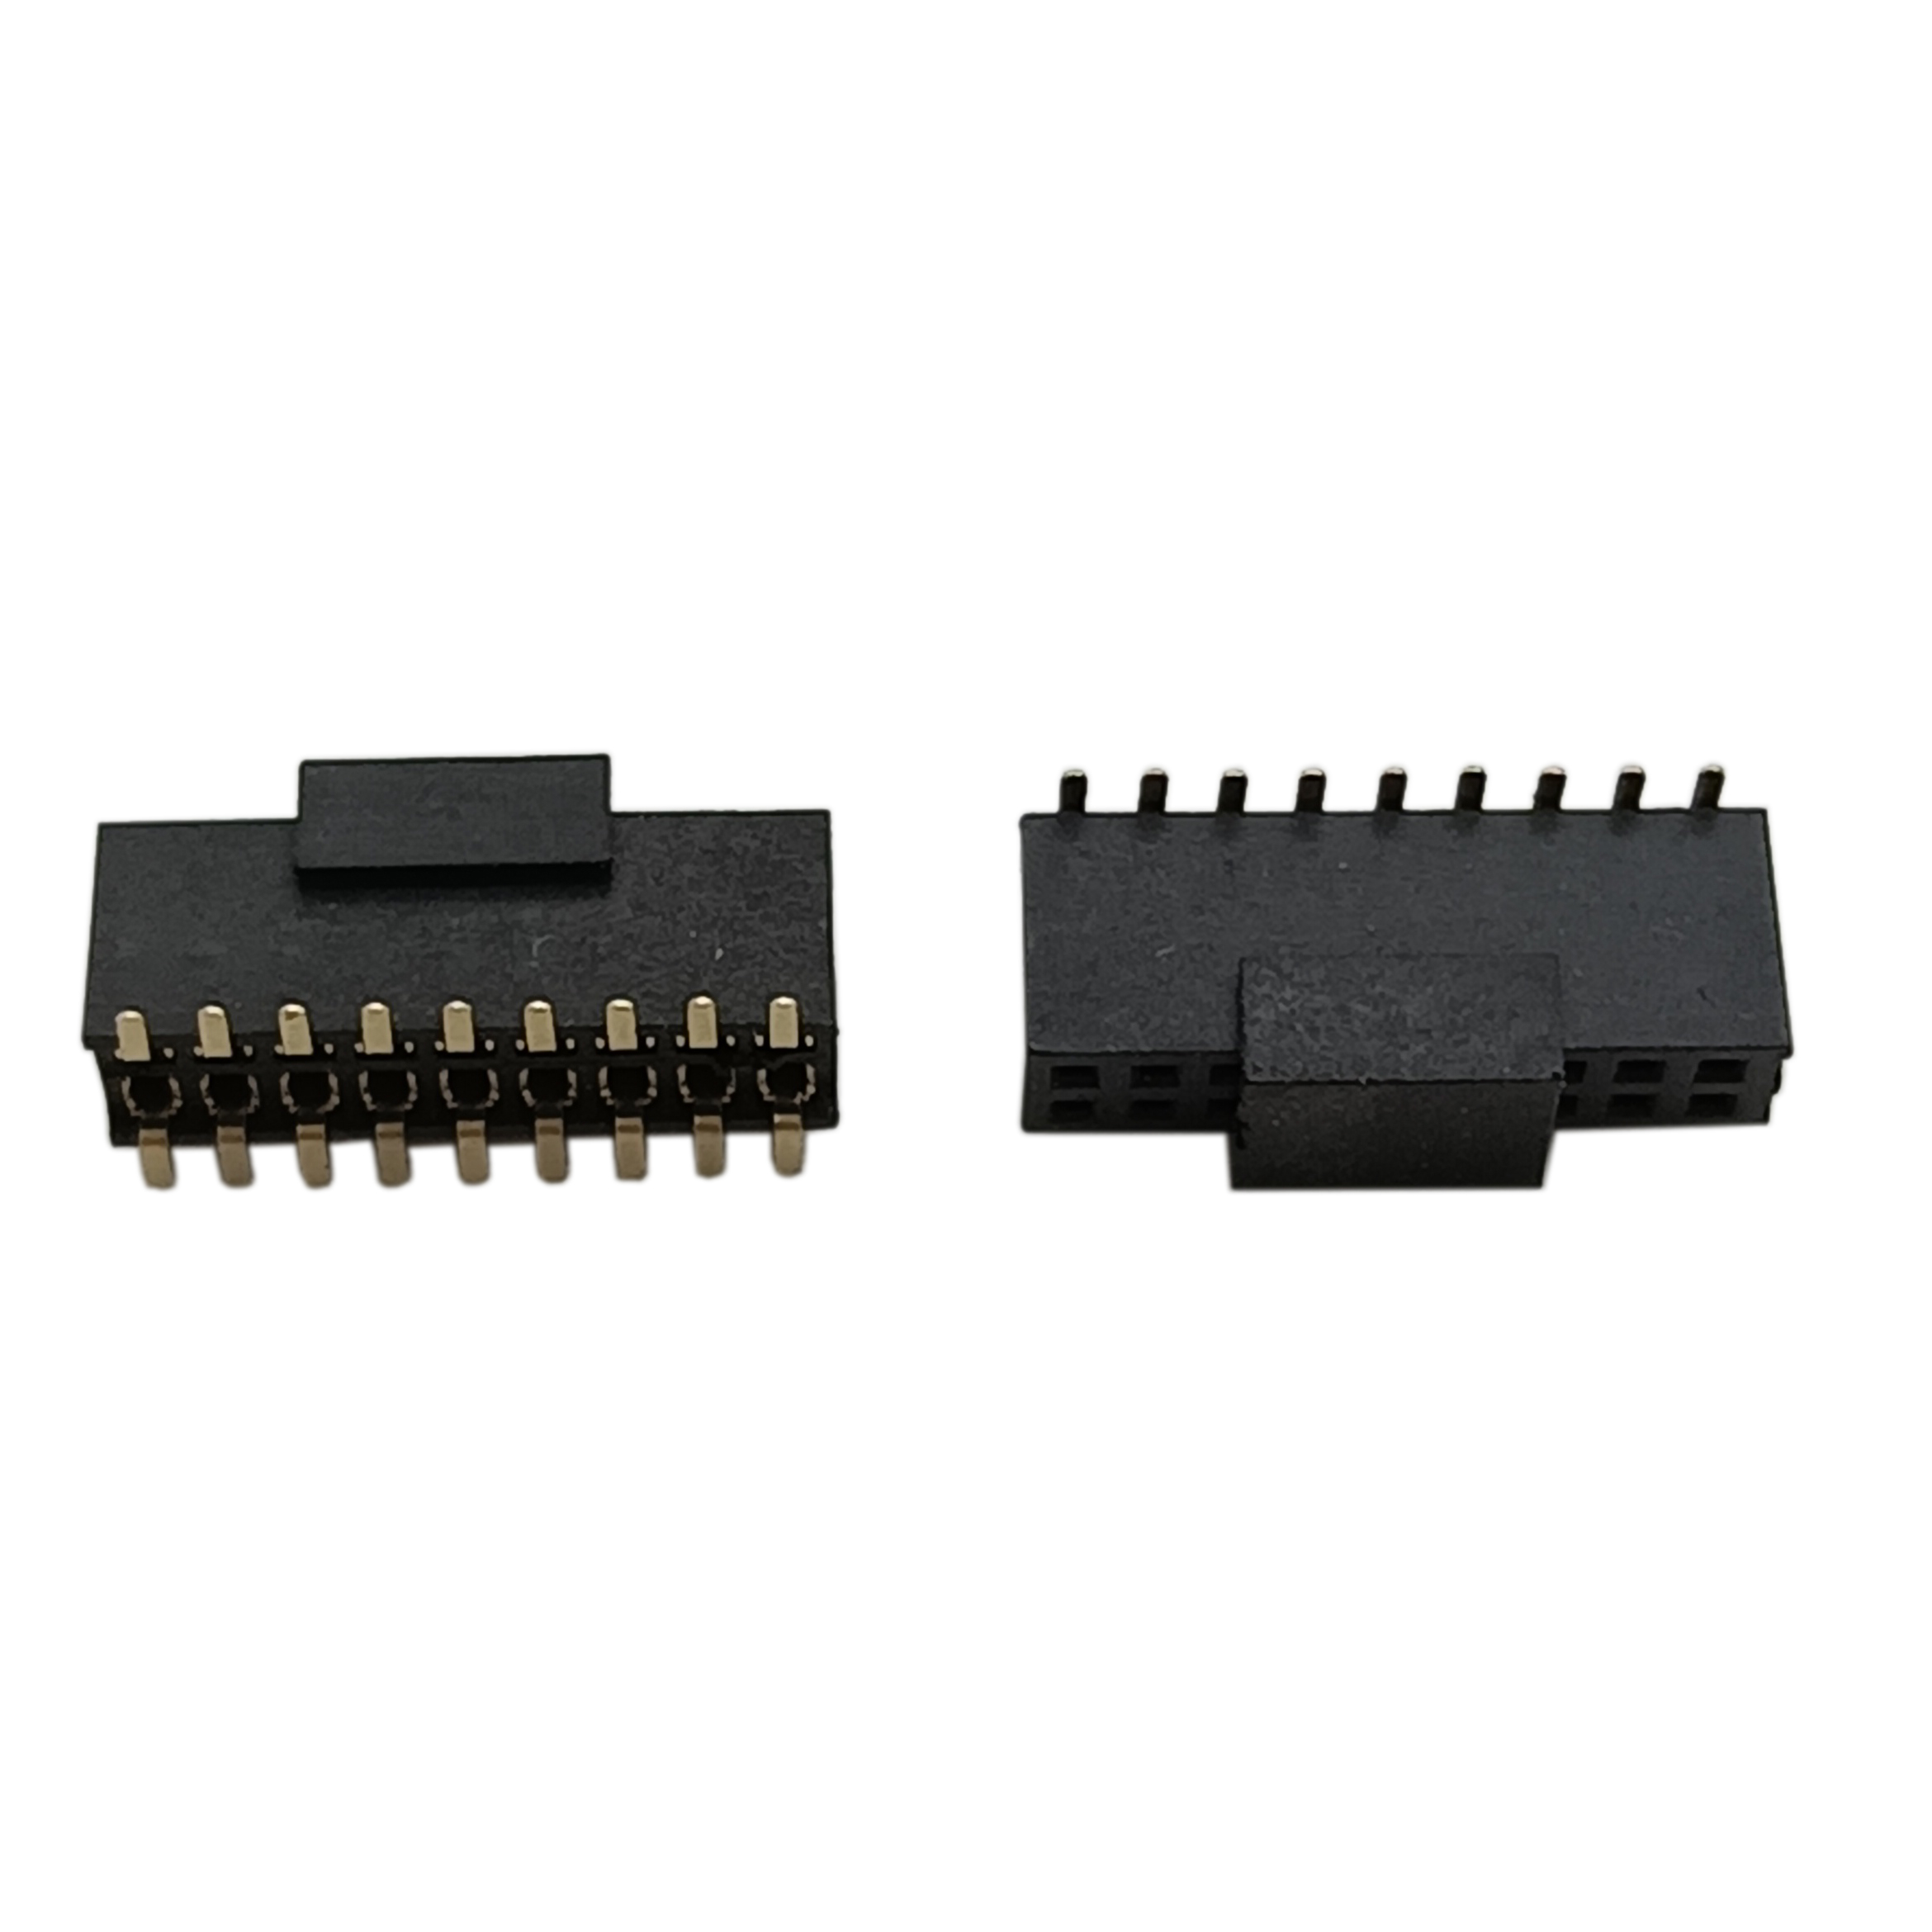 pcb relay socket is a component used in electronic circuits to securely hold a relay in place on a PCB 